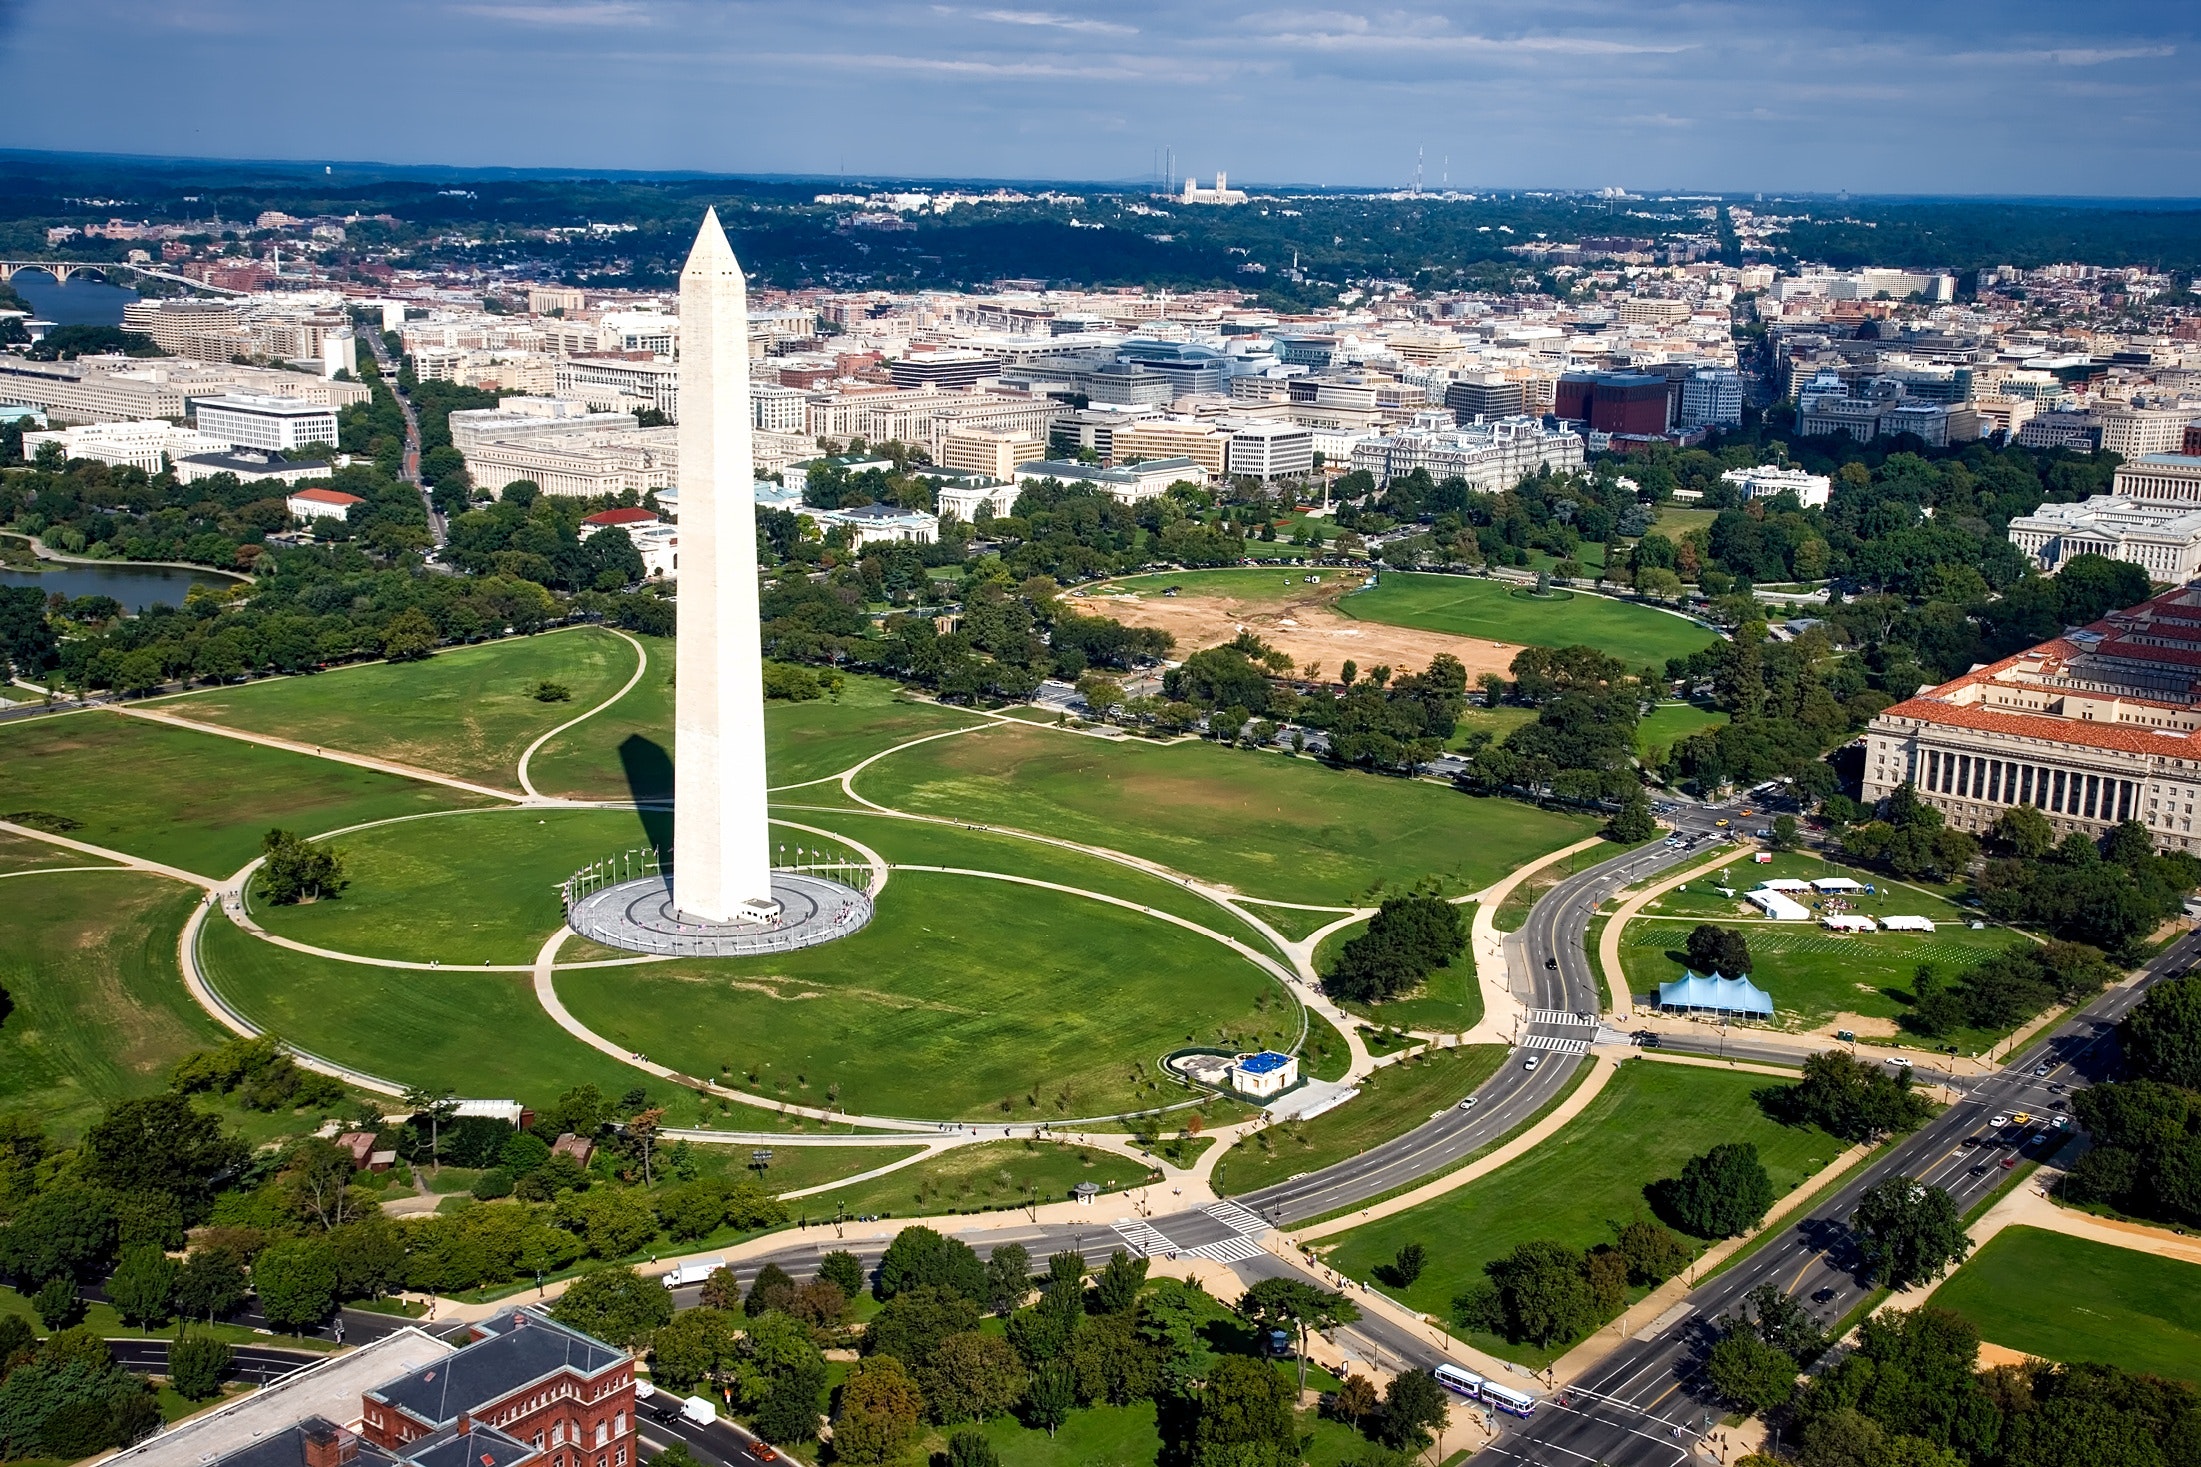 Image of the Washington monument, green space, and buildings.